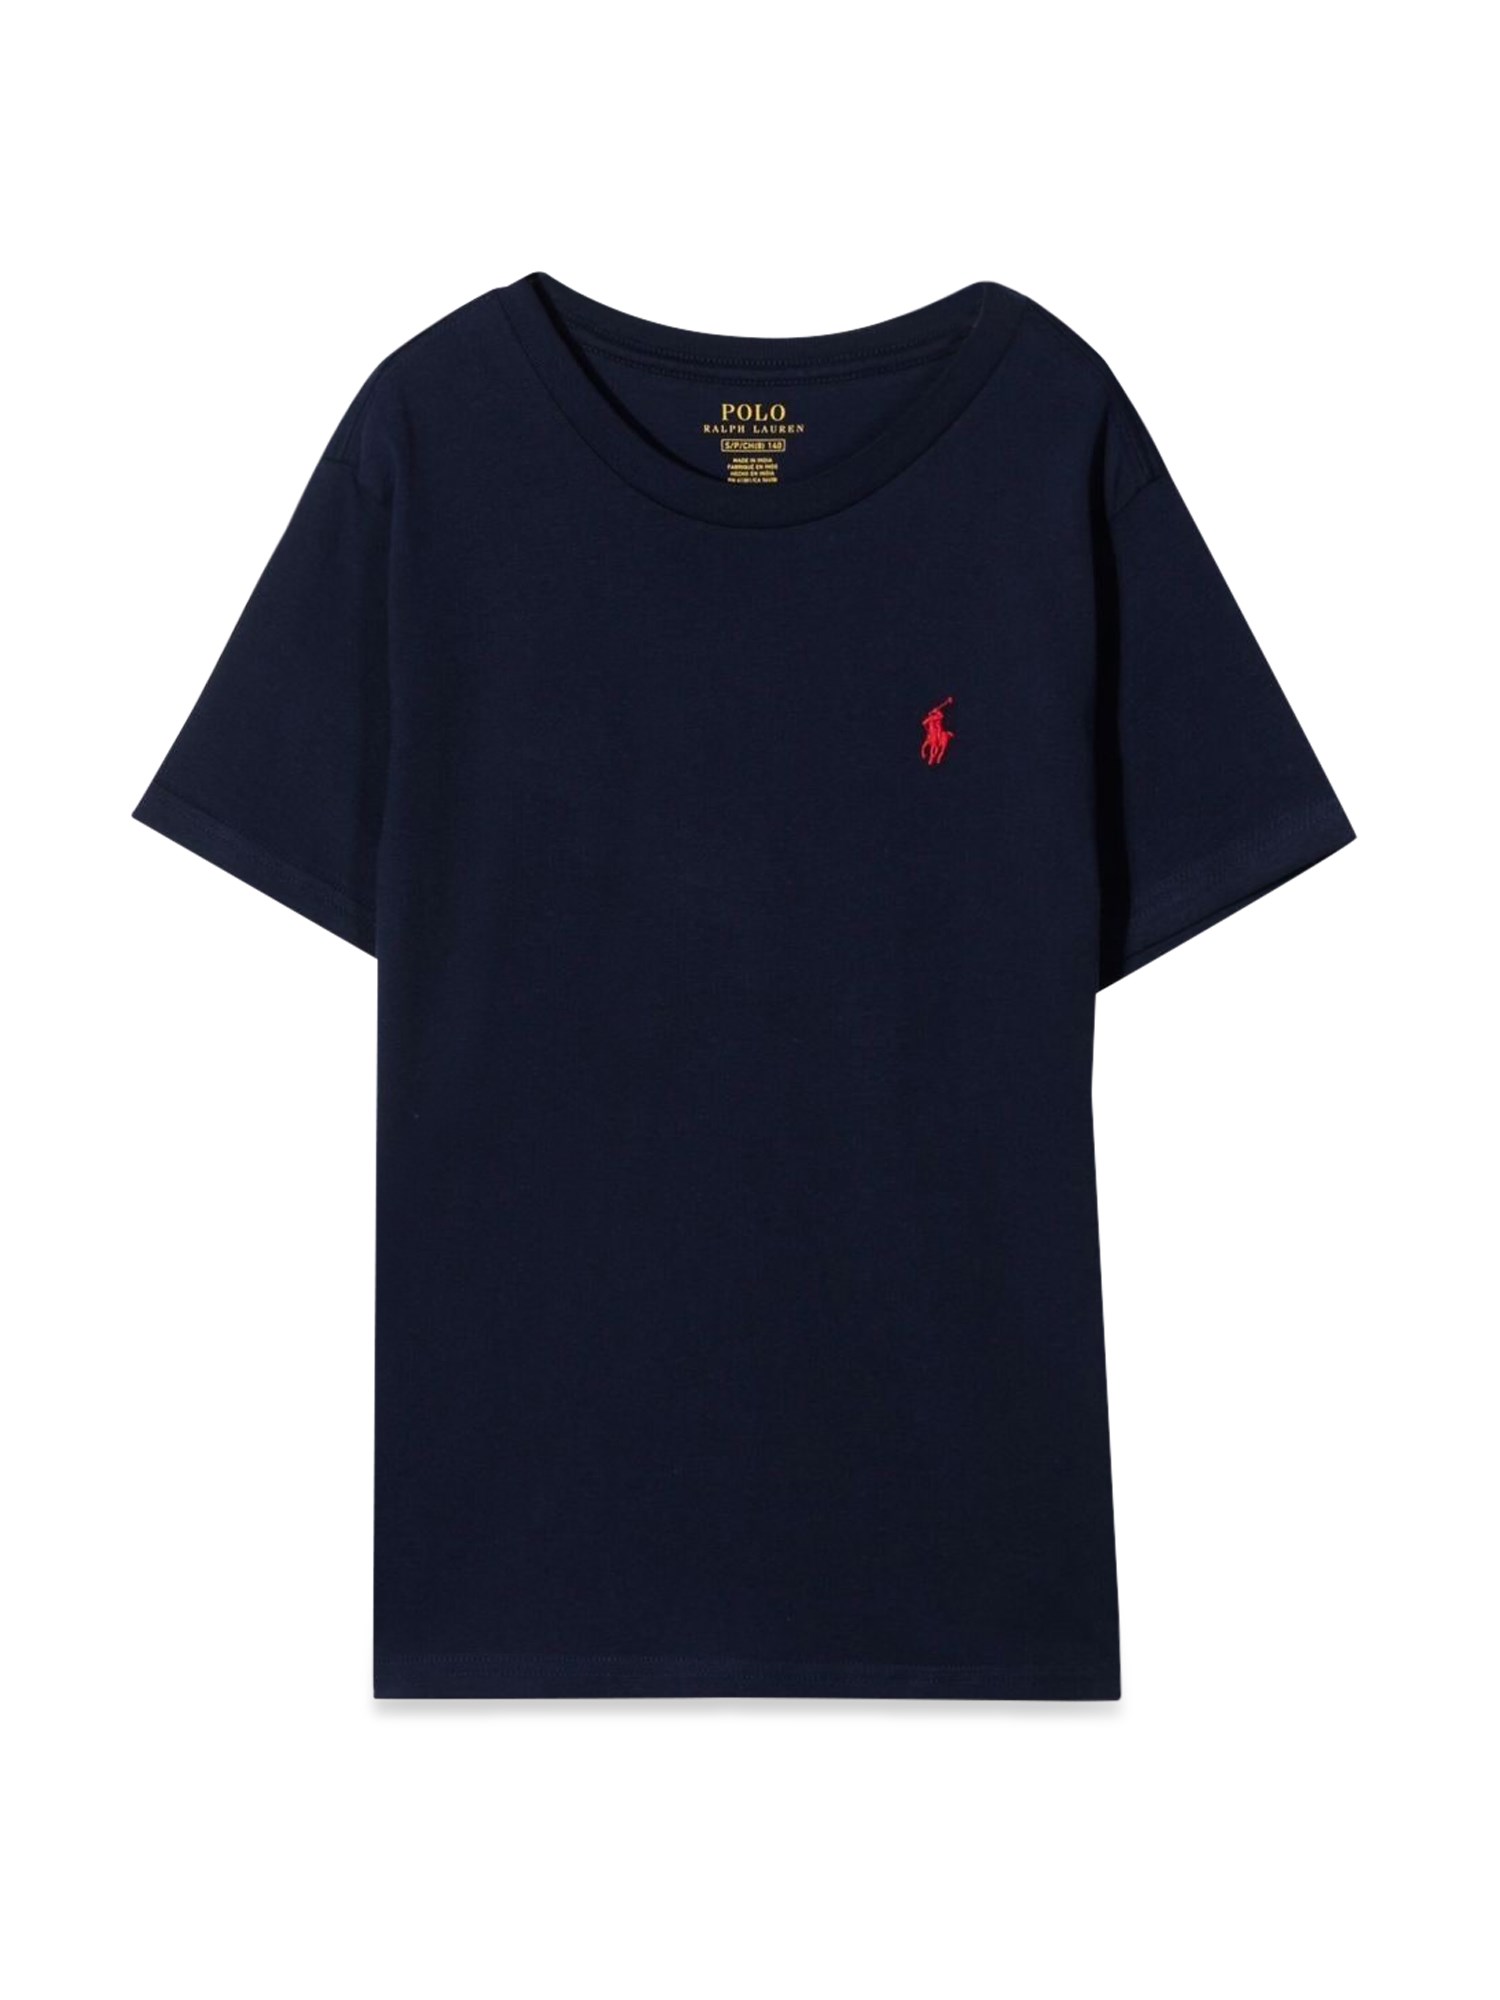 polo ralph lauren t-shirt with embroidery